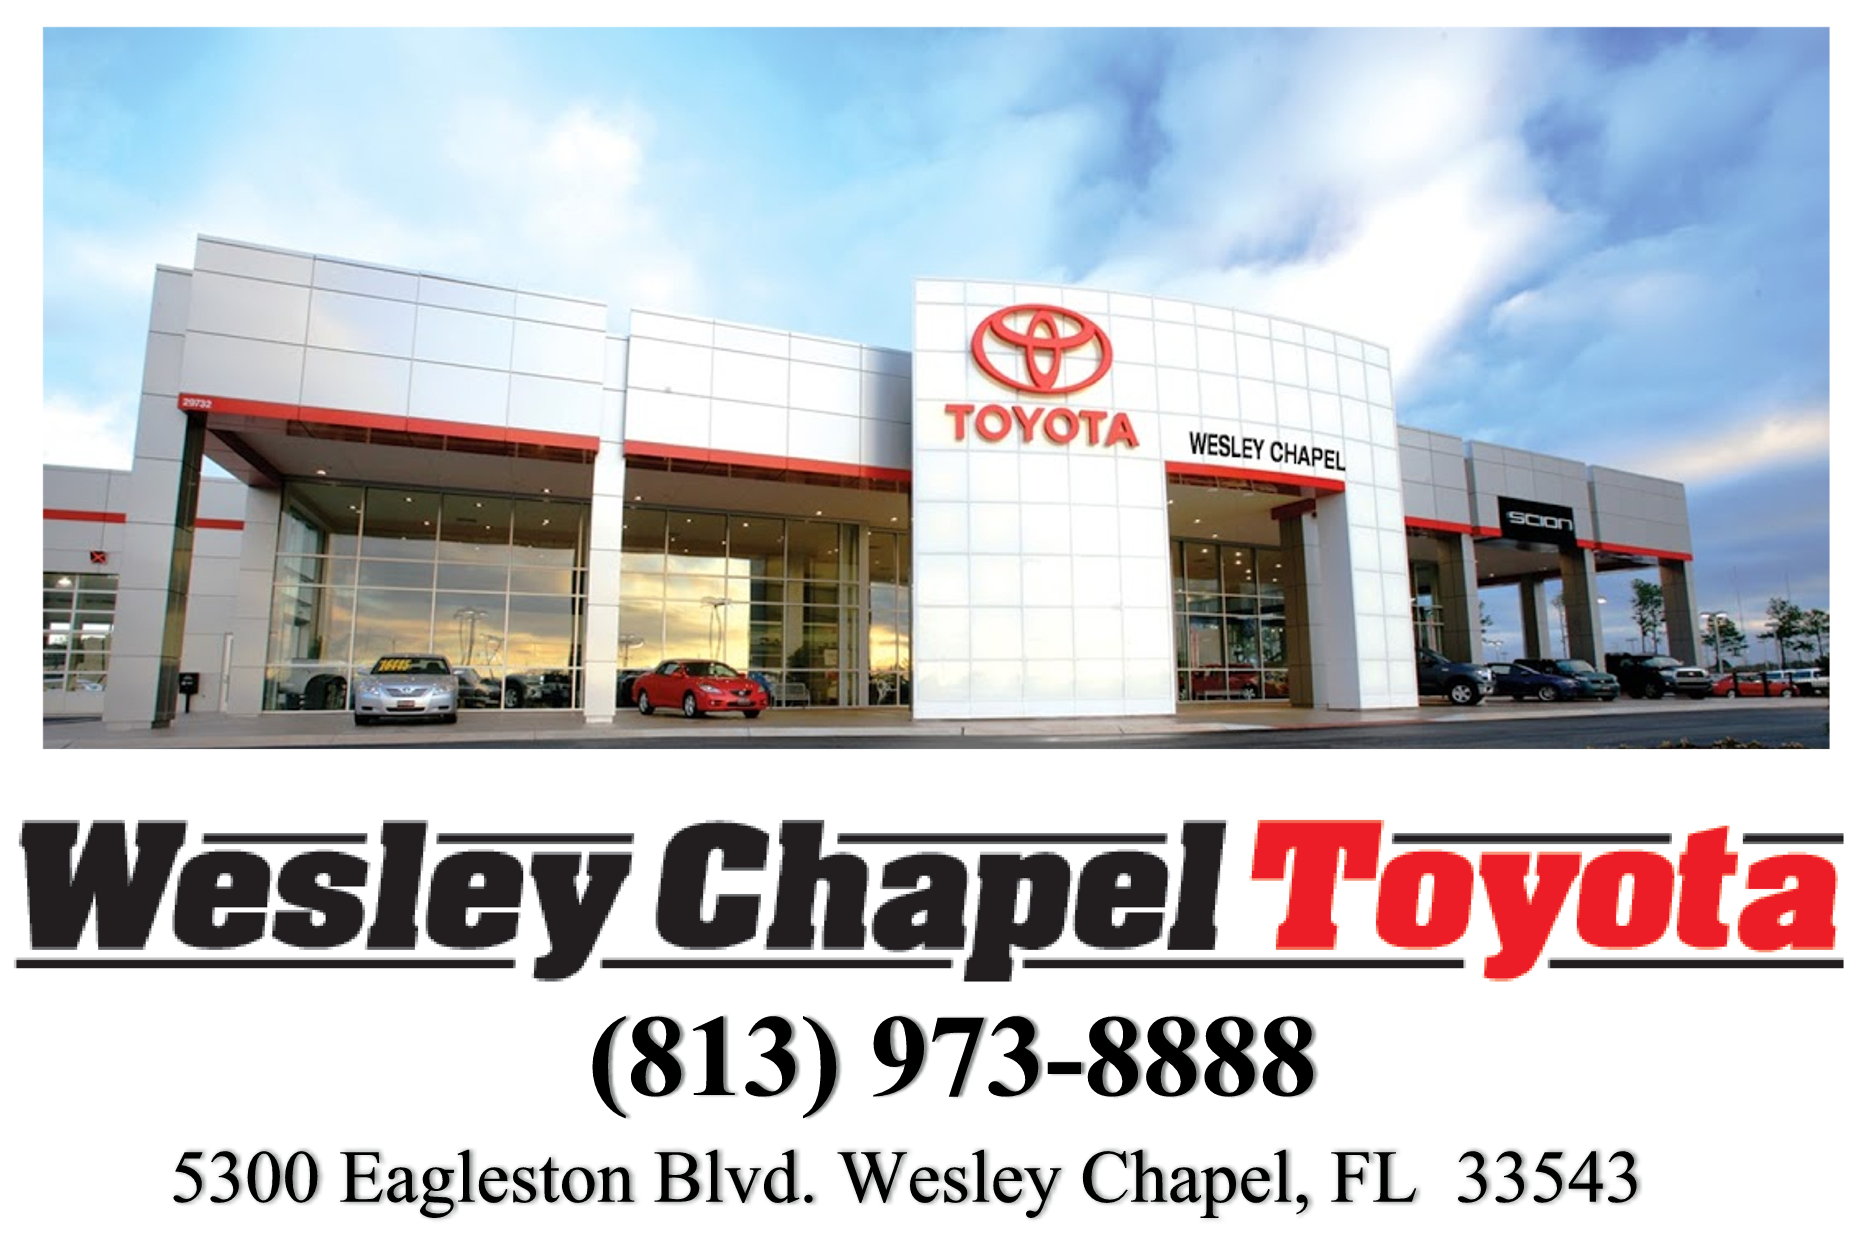 wesley chapel toyota reviews #5